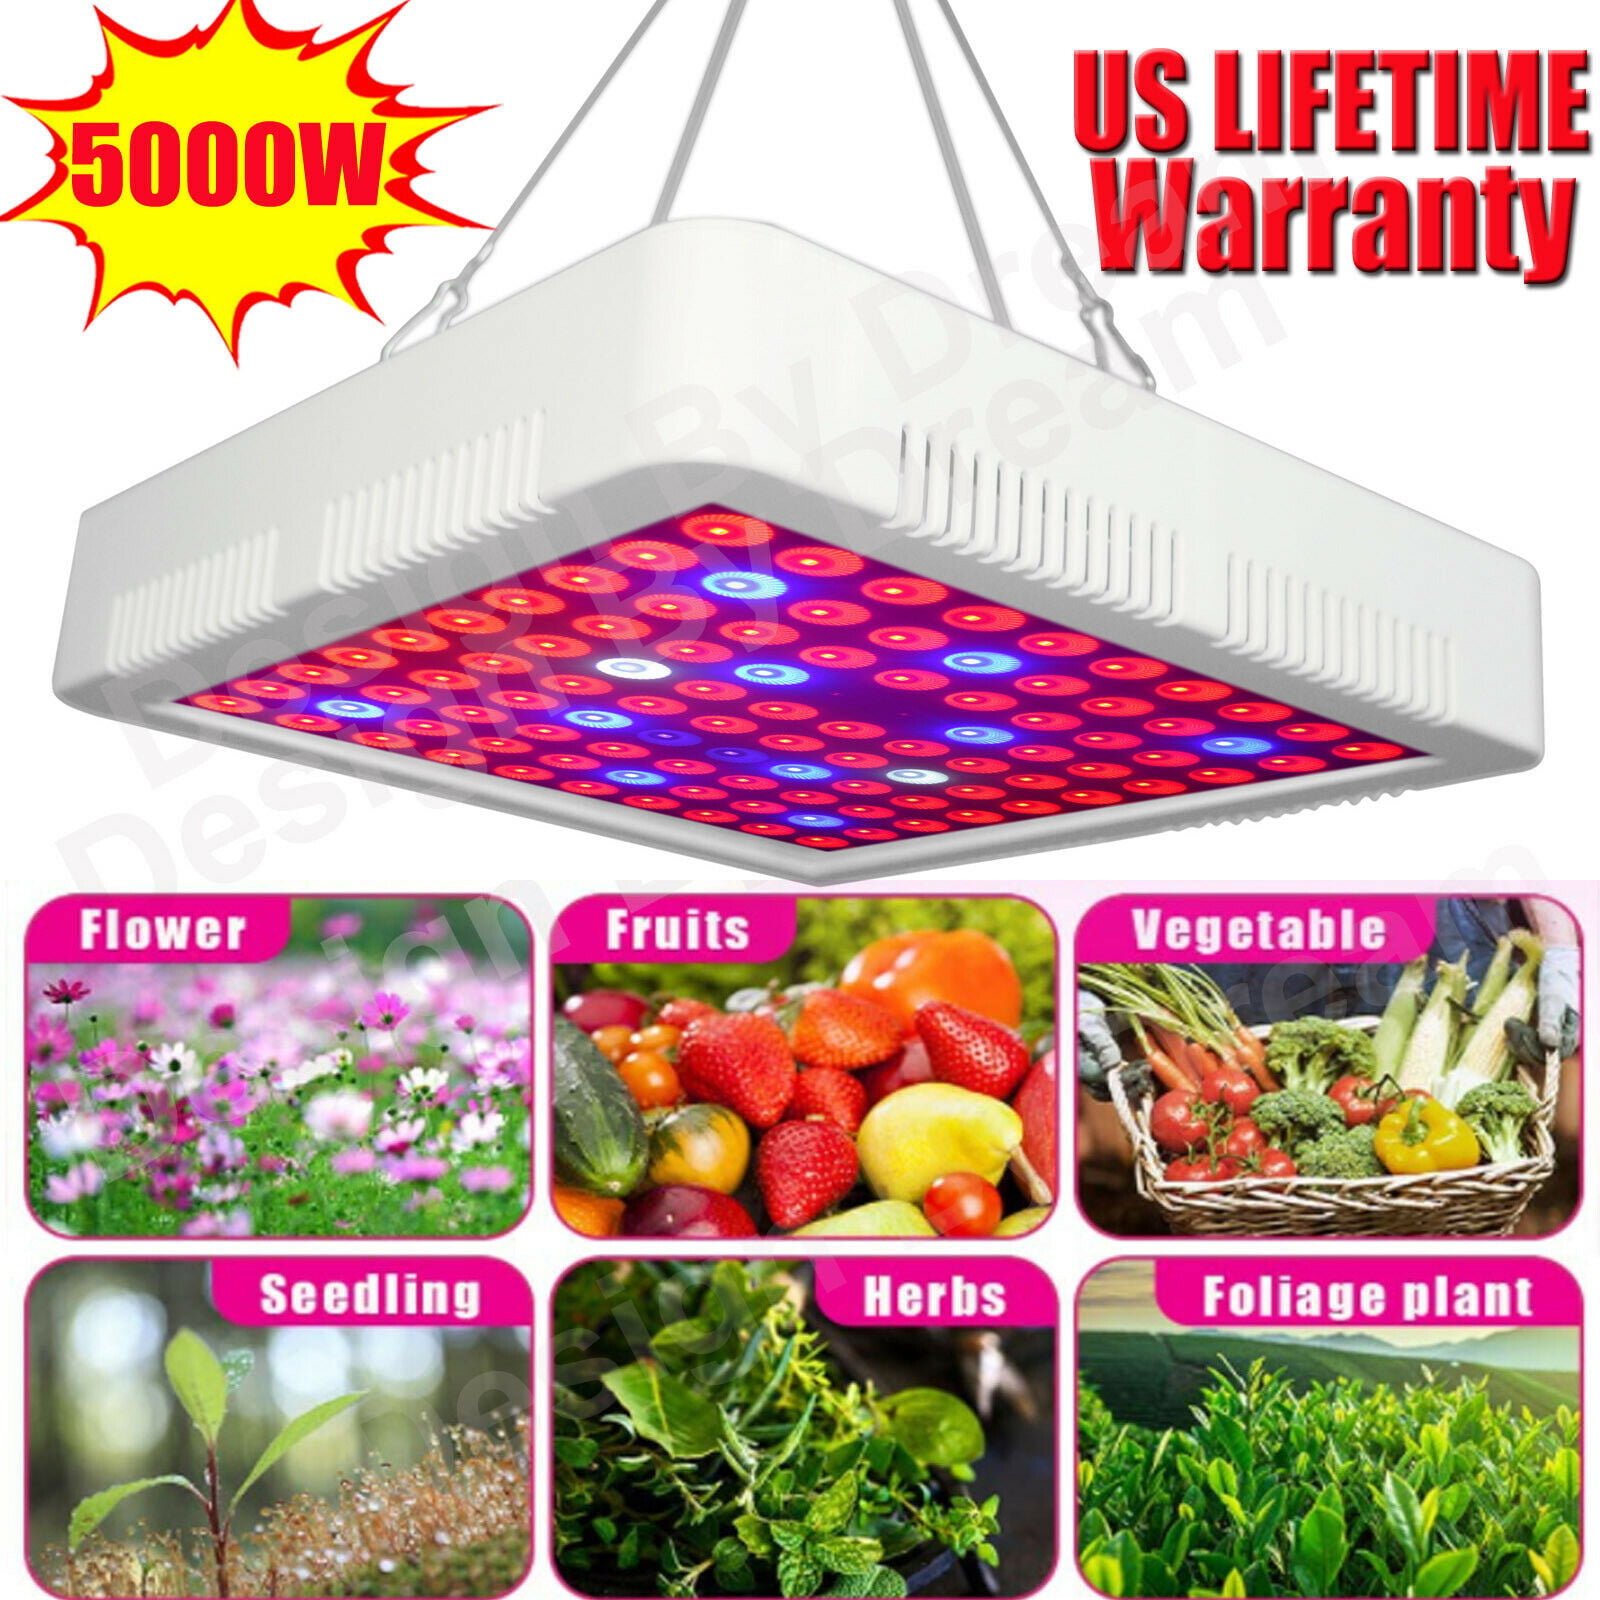 Details about   5000W LED Grow Light Hydroponic Full Spectrum Indoor Veg Flower Plant Lamp ZY 